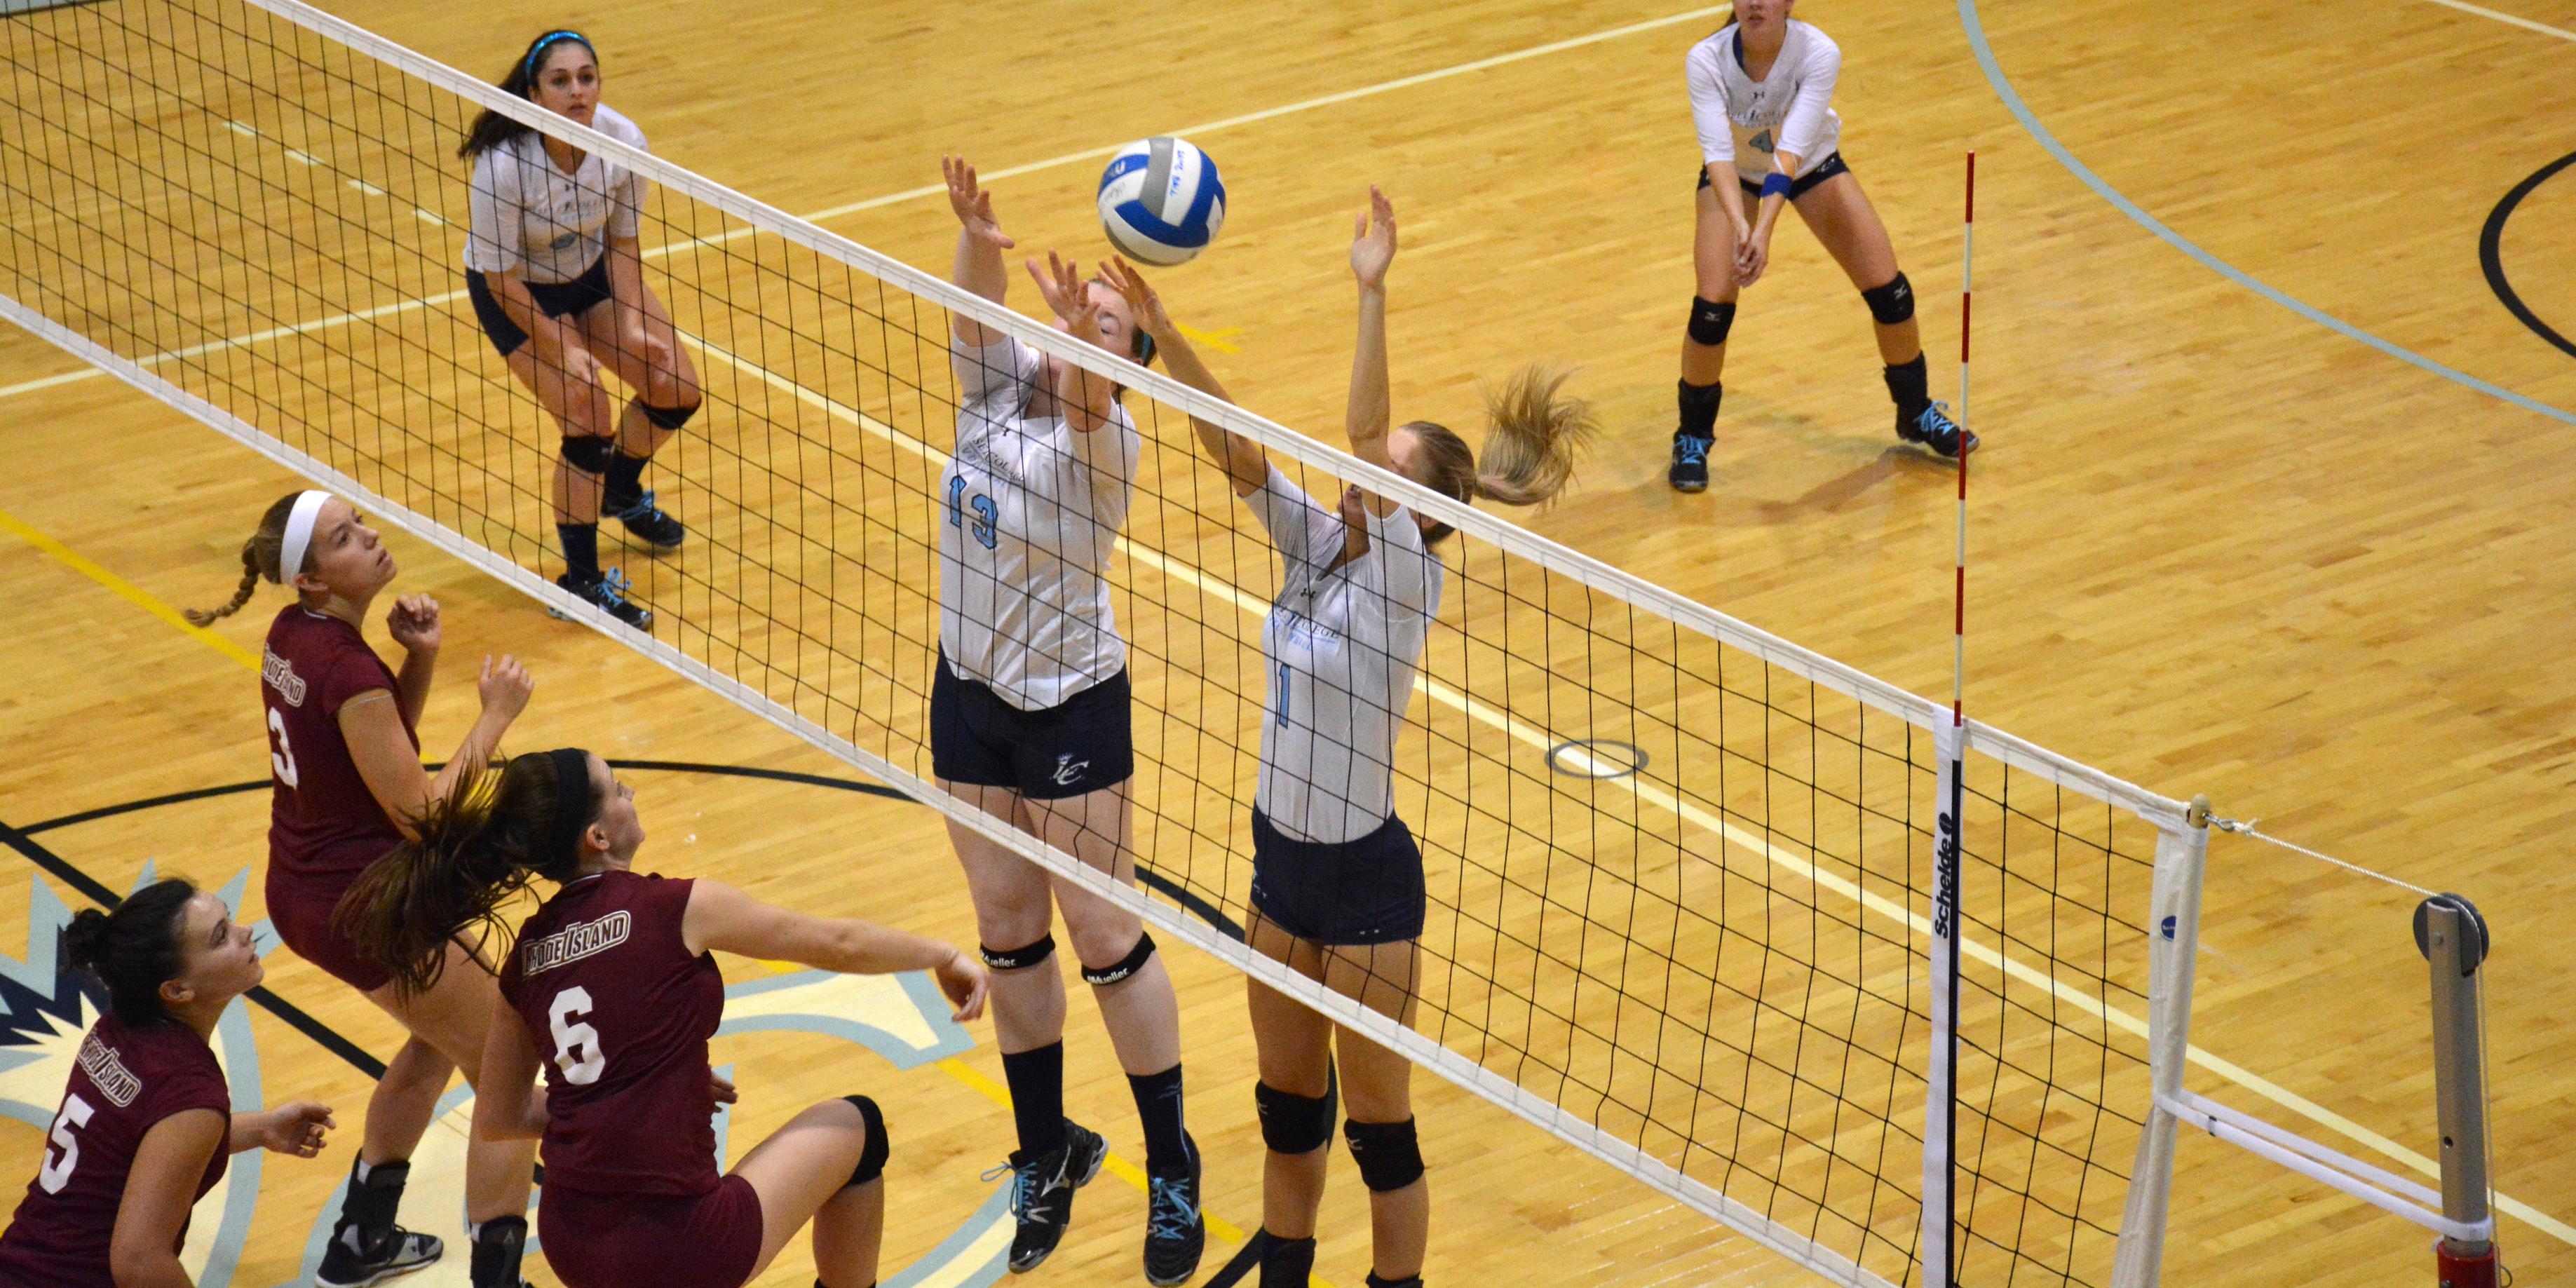 Smith College Comeback Foils Women's Volleyball in Home Match